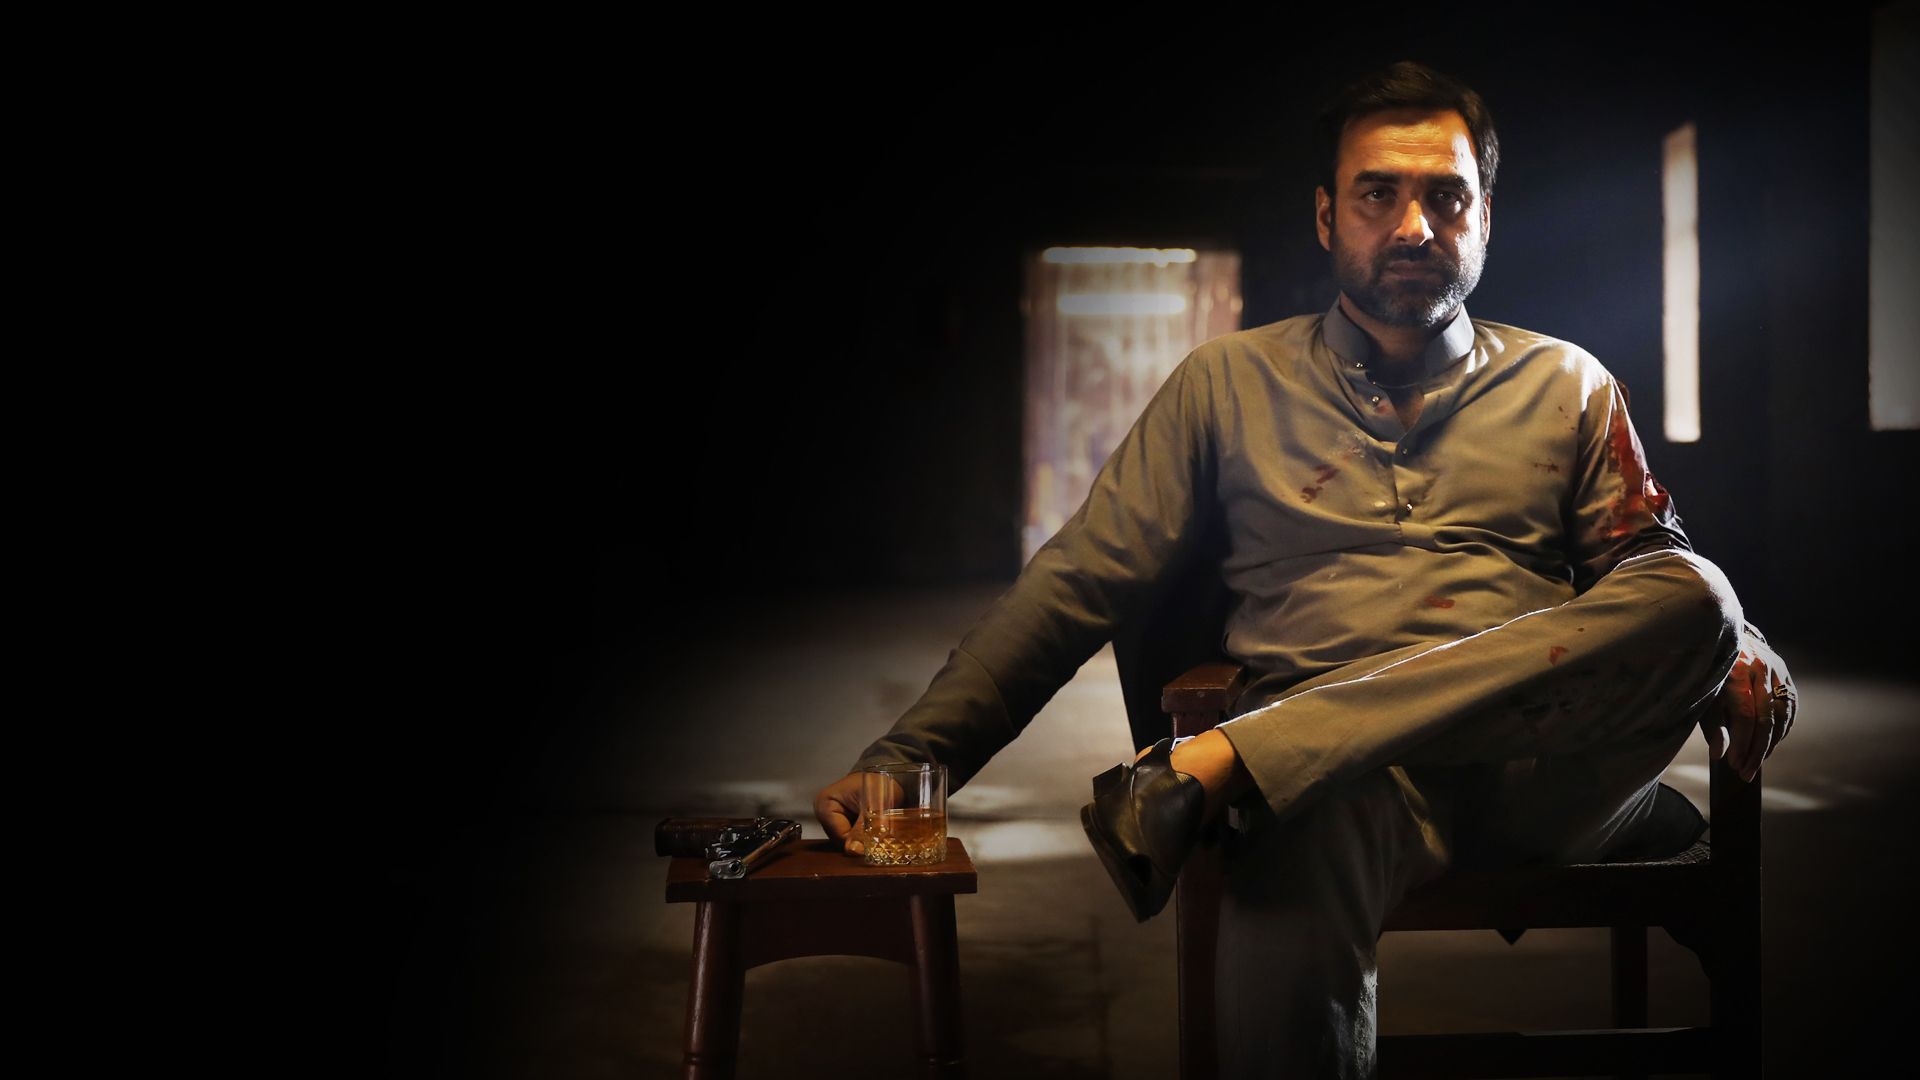 Mirzapur Season 2 Review: The Second Season Won't Disappoint Any One, However, Nothing Changes